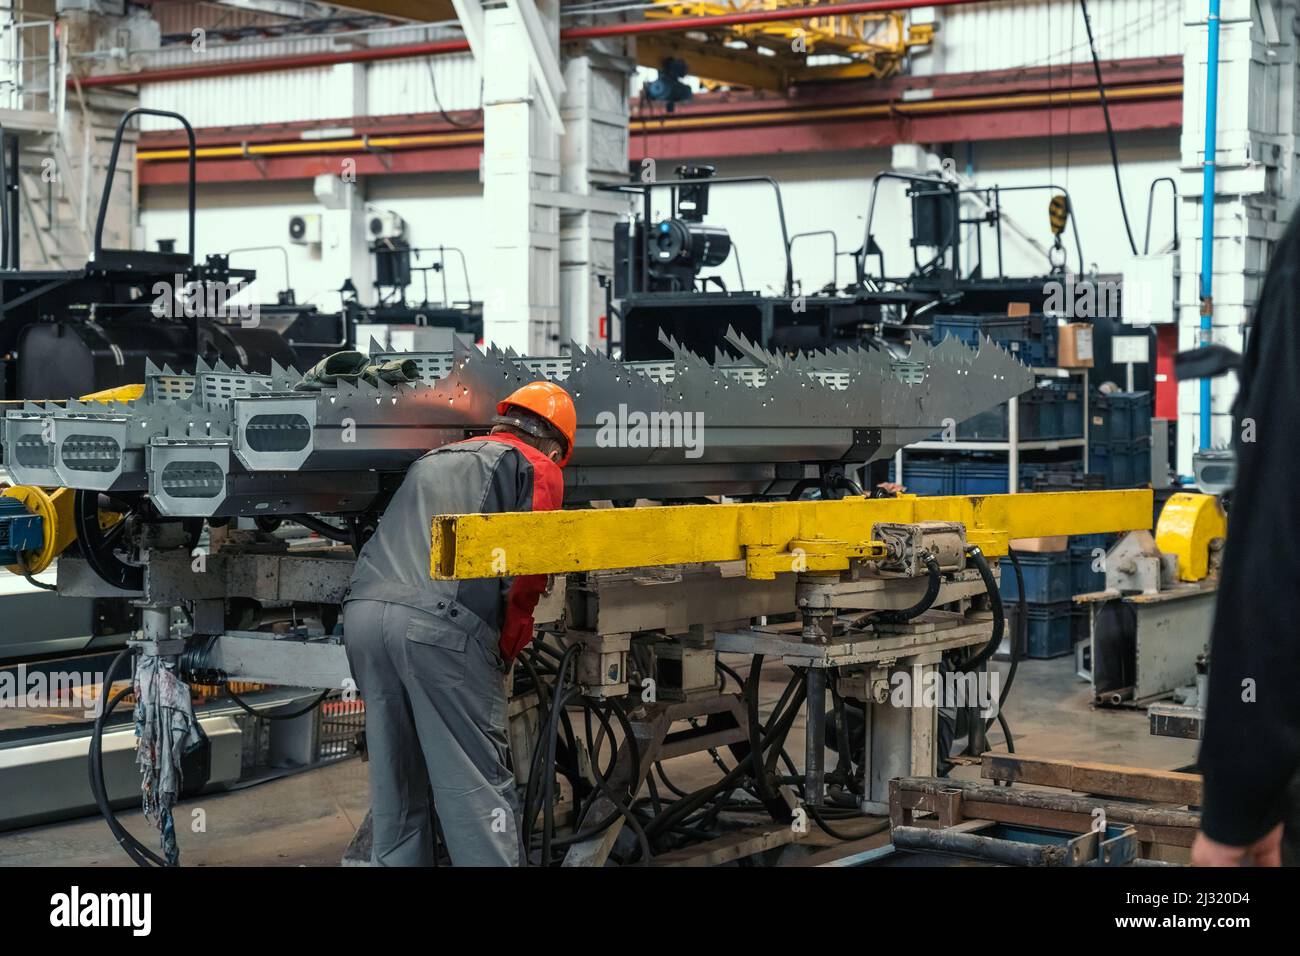 Agricultural tractor or combine harvesters in industrial machinery factory in process of assembly. Stock Photo